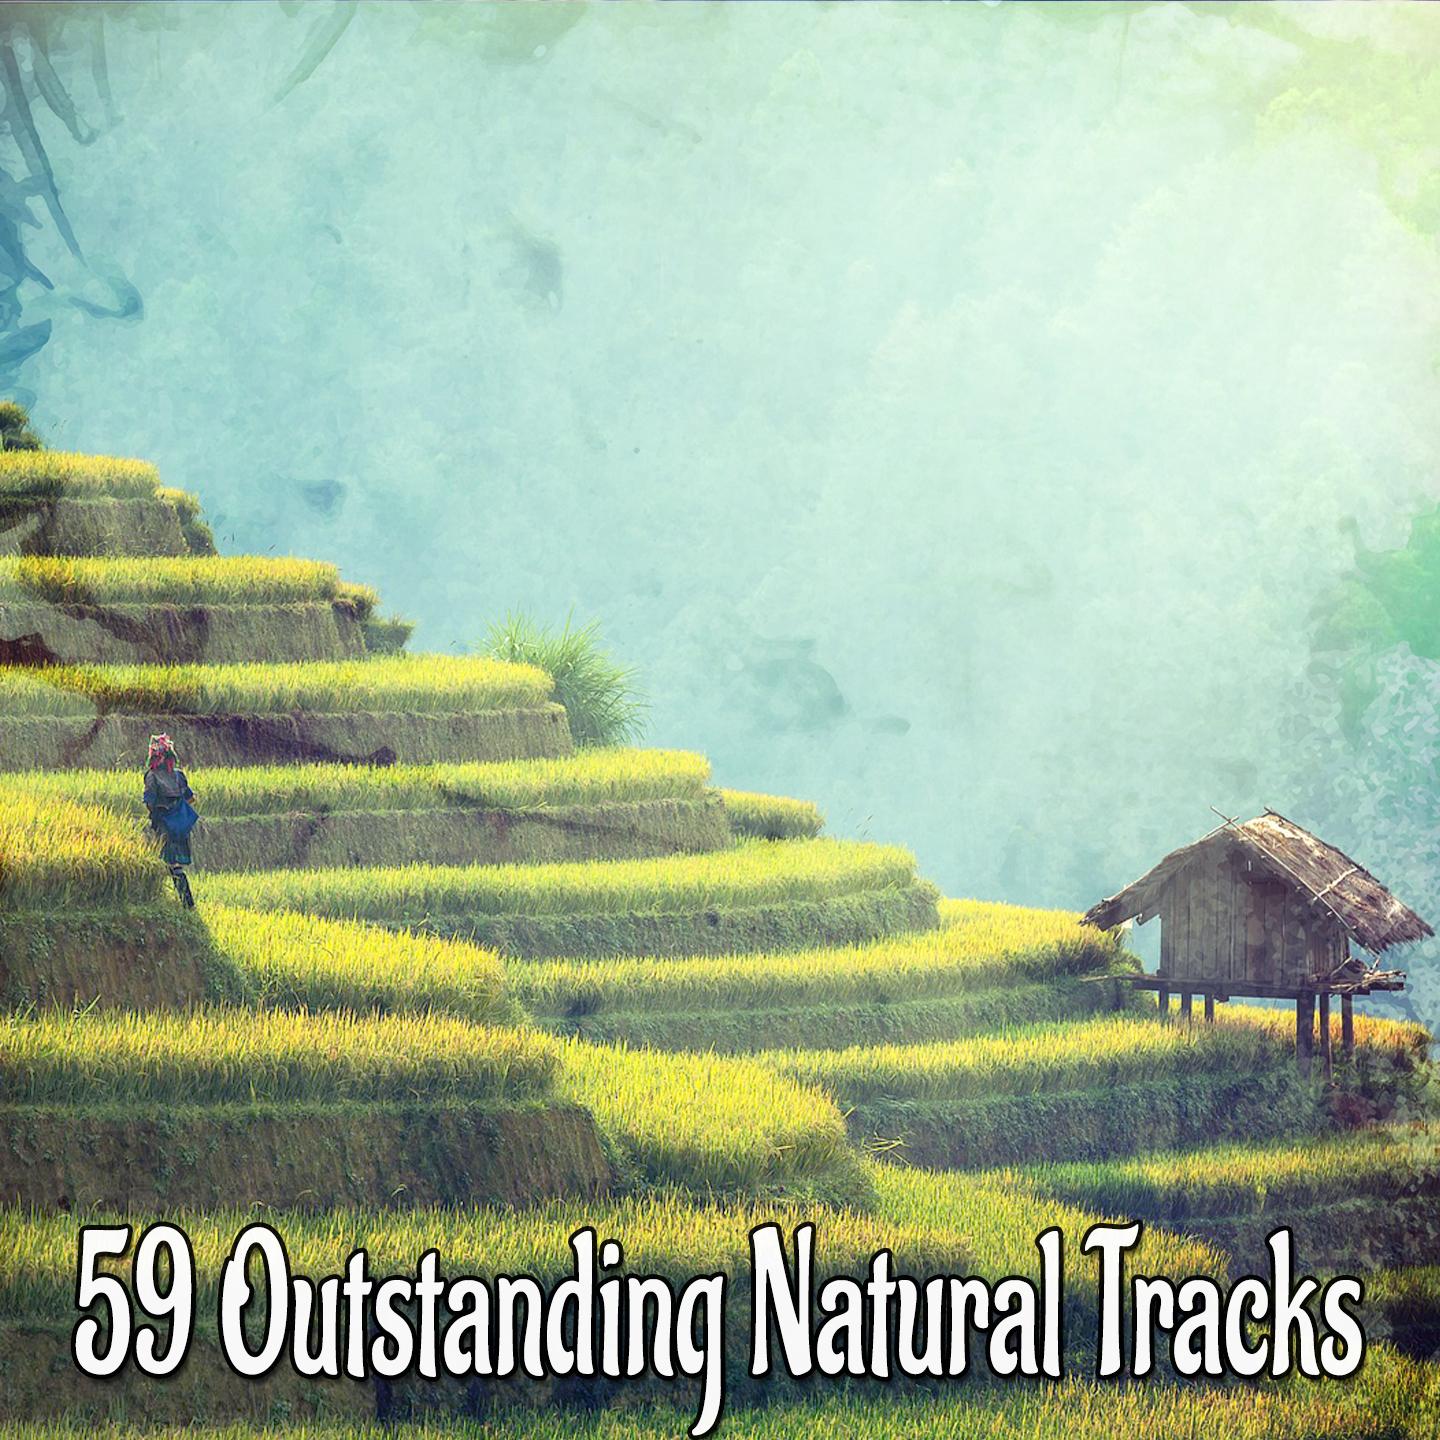 59 Outstanding Natural Tracks